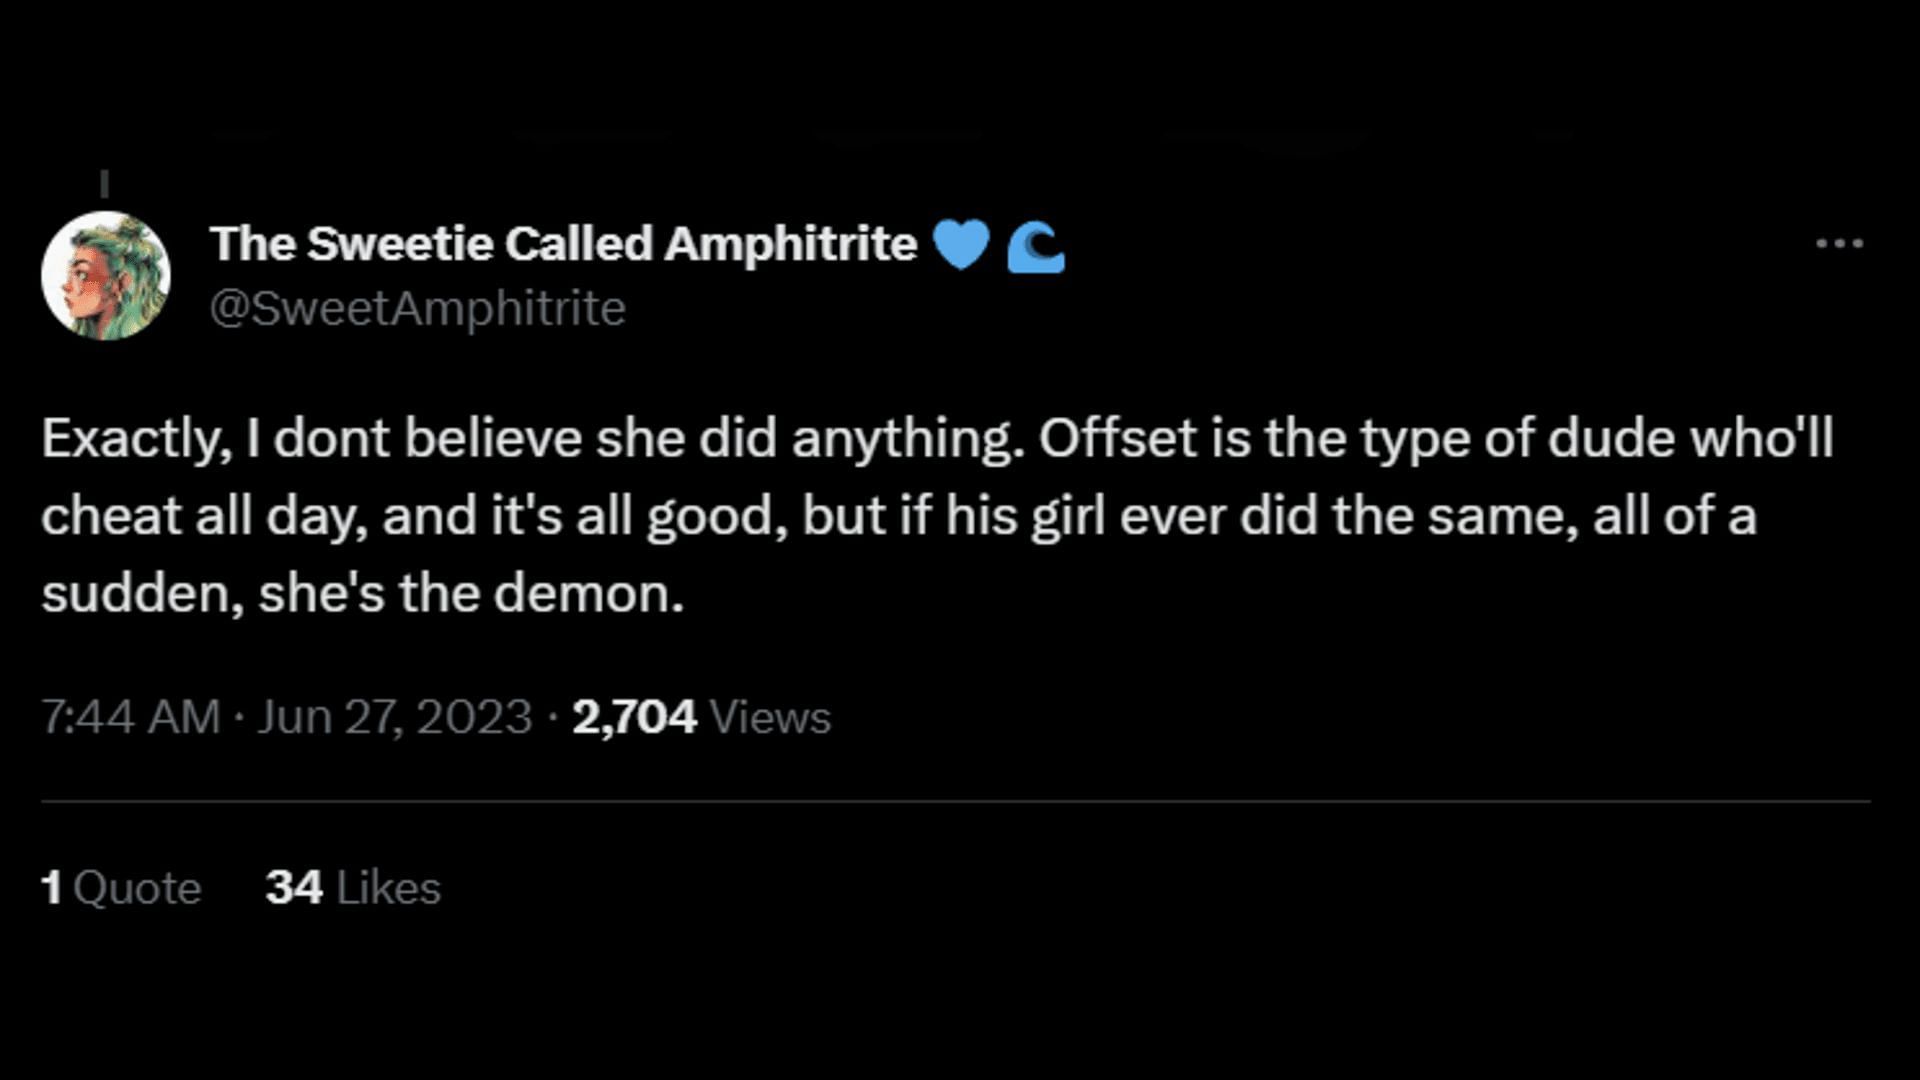 A Twitter user calls out Offset for being a hypocrite. (Image via Twitter/The Sweetie Called Amphitrite)